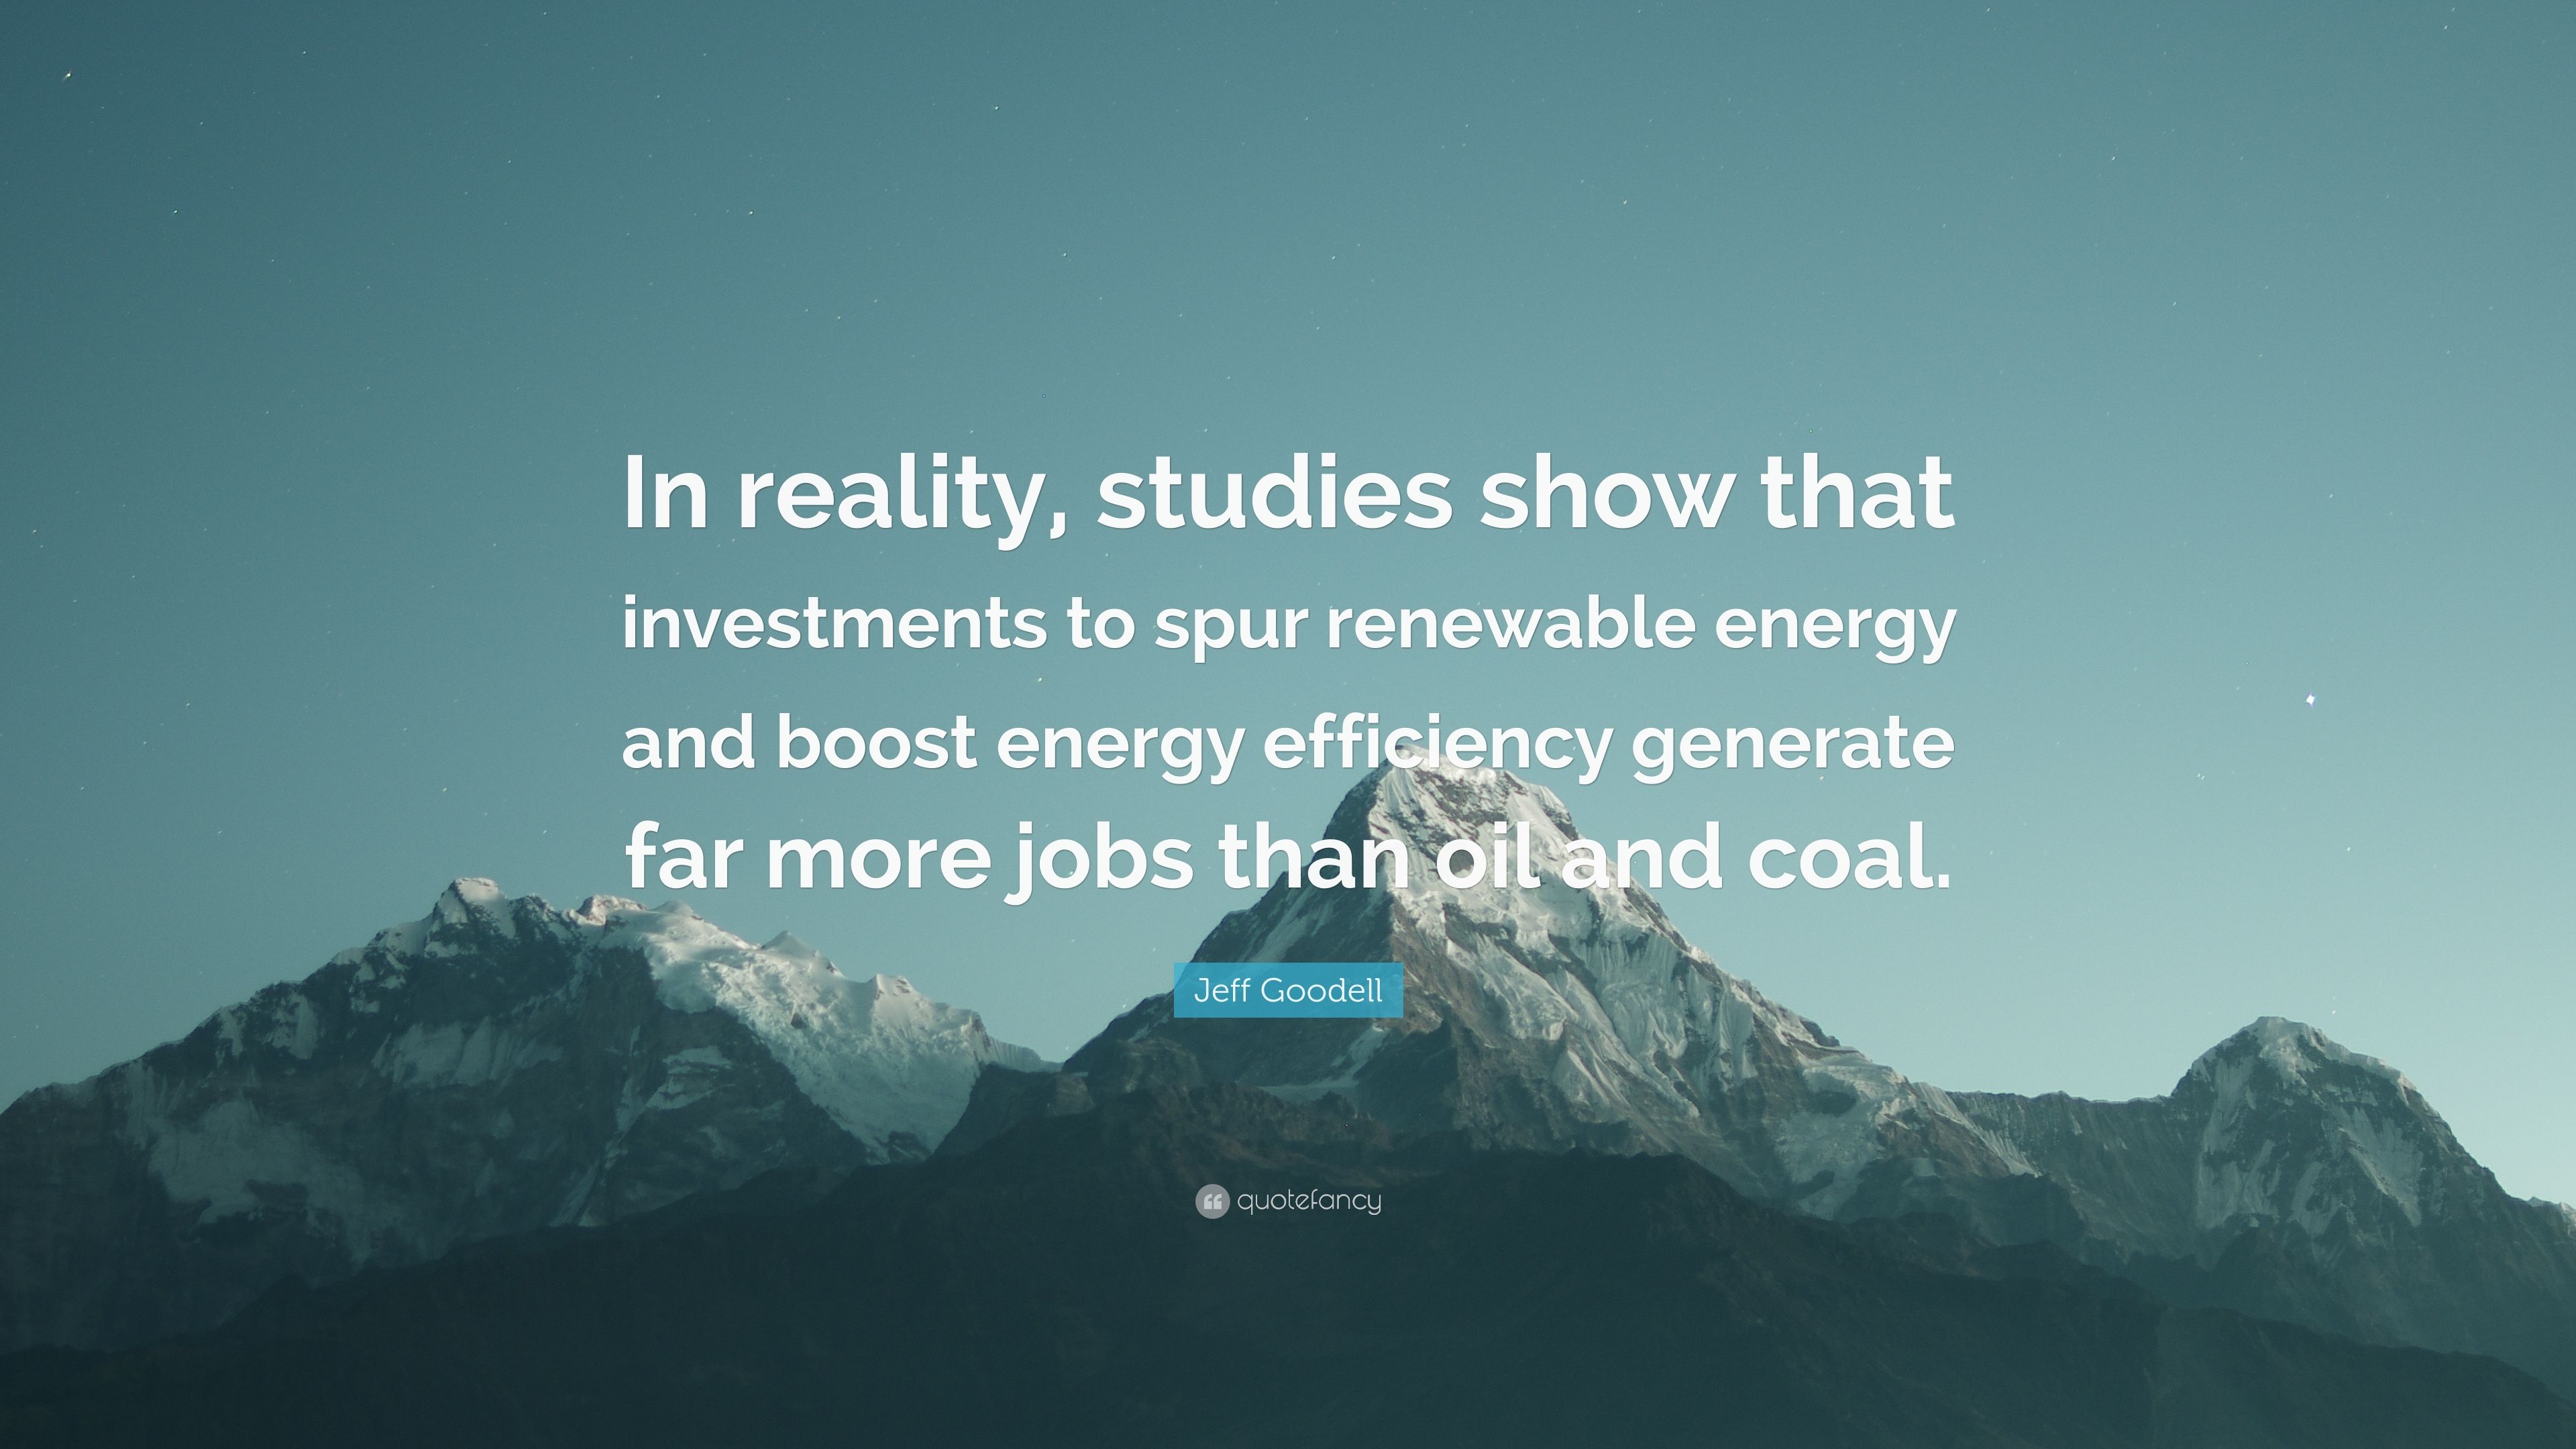 Jeff Goodell Quote: “In reality, studies show that investments to